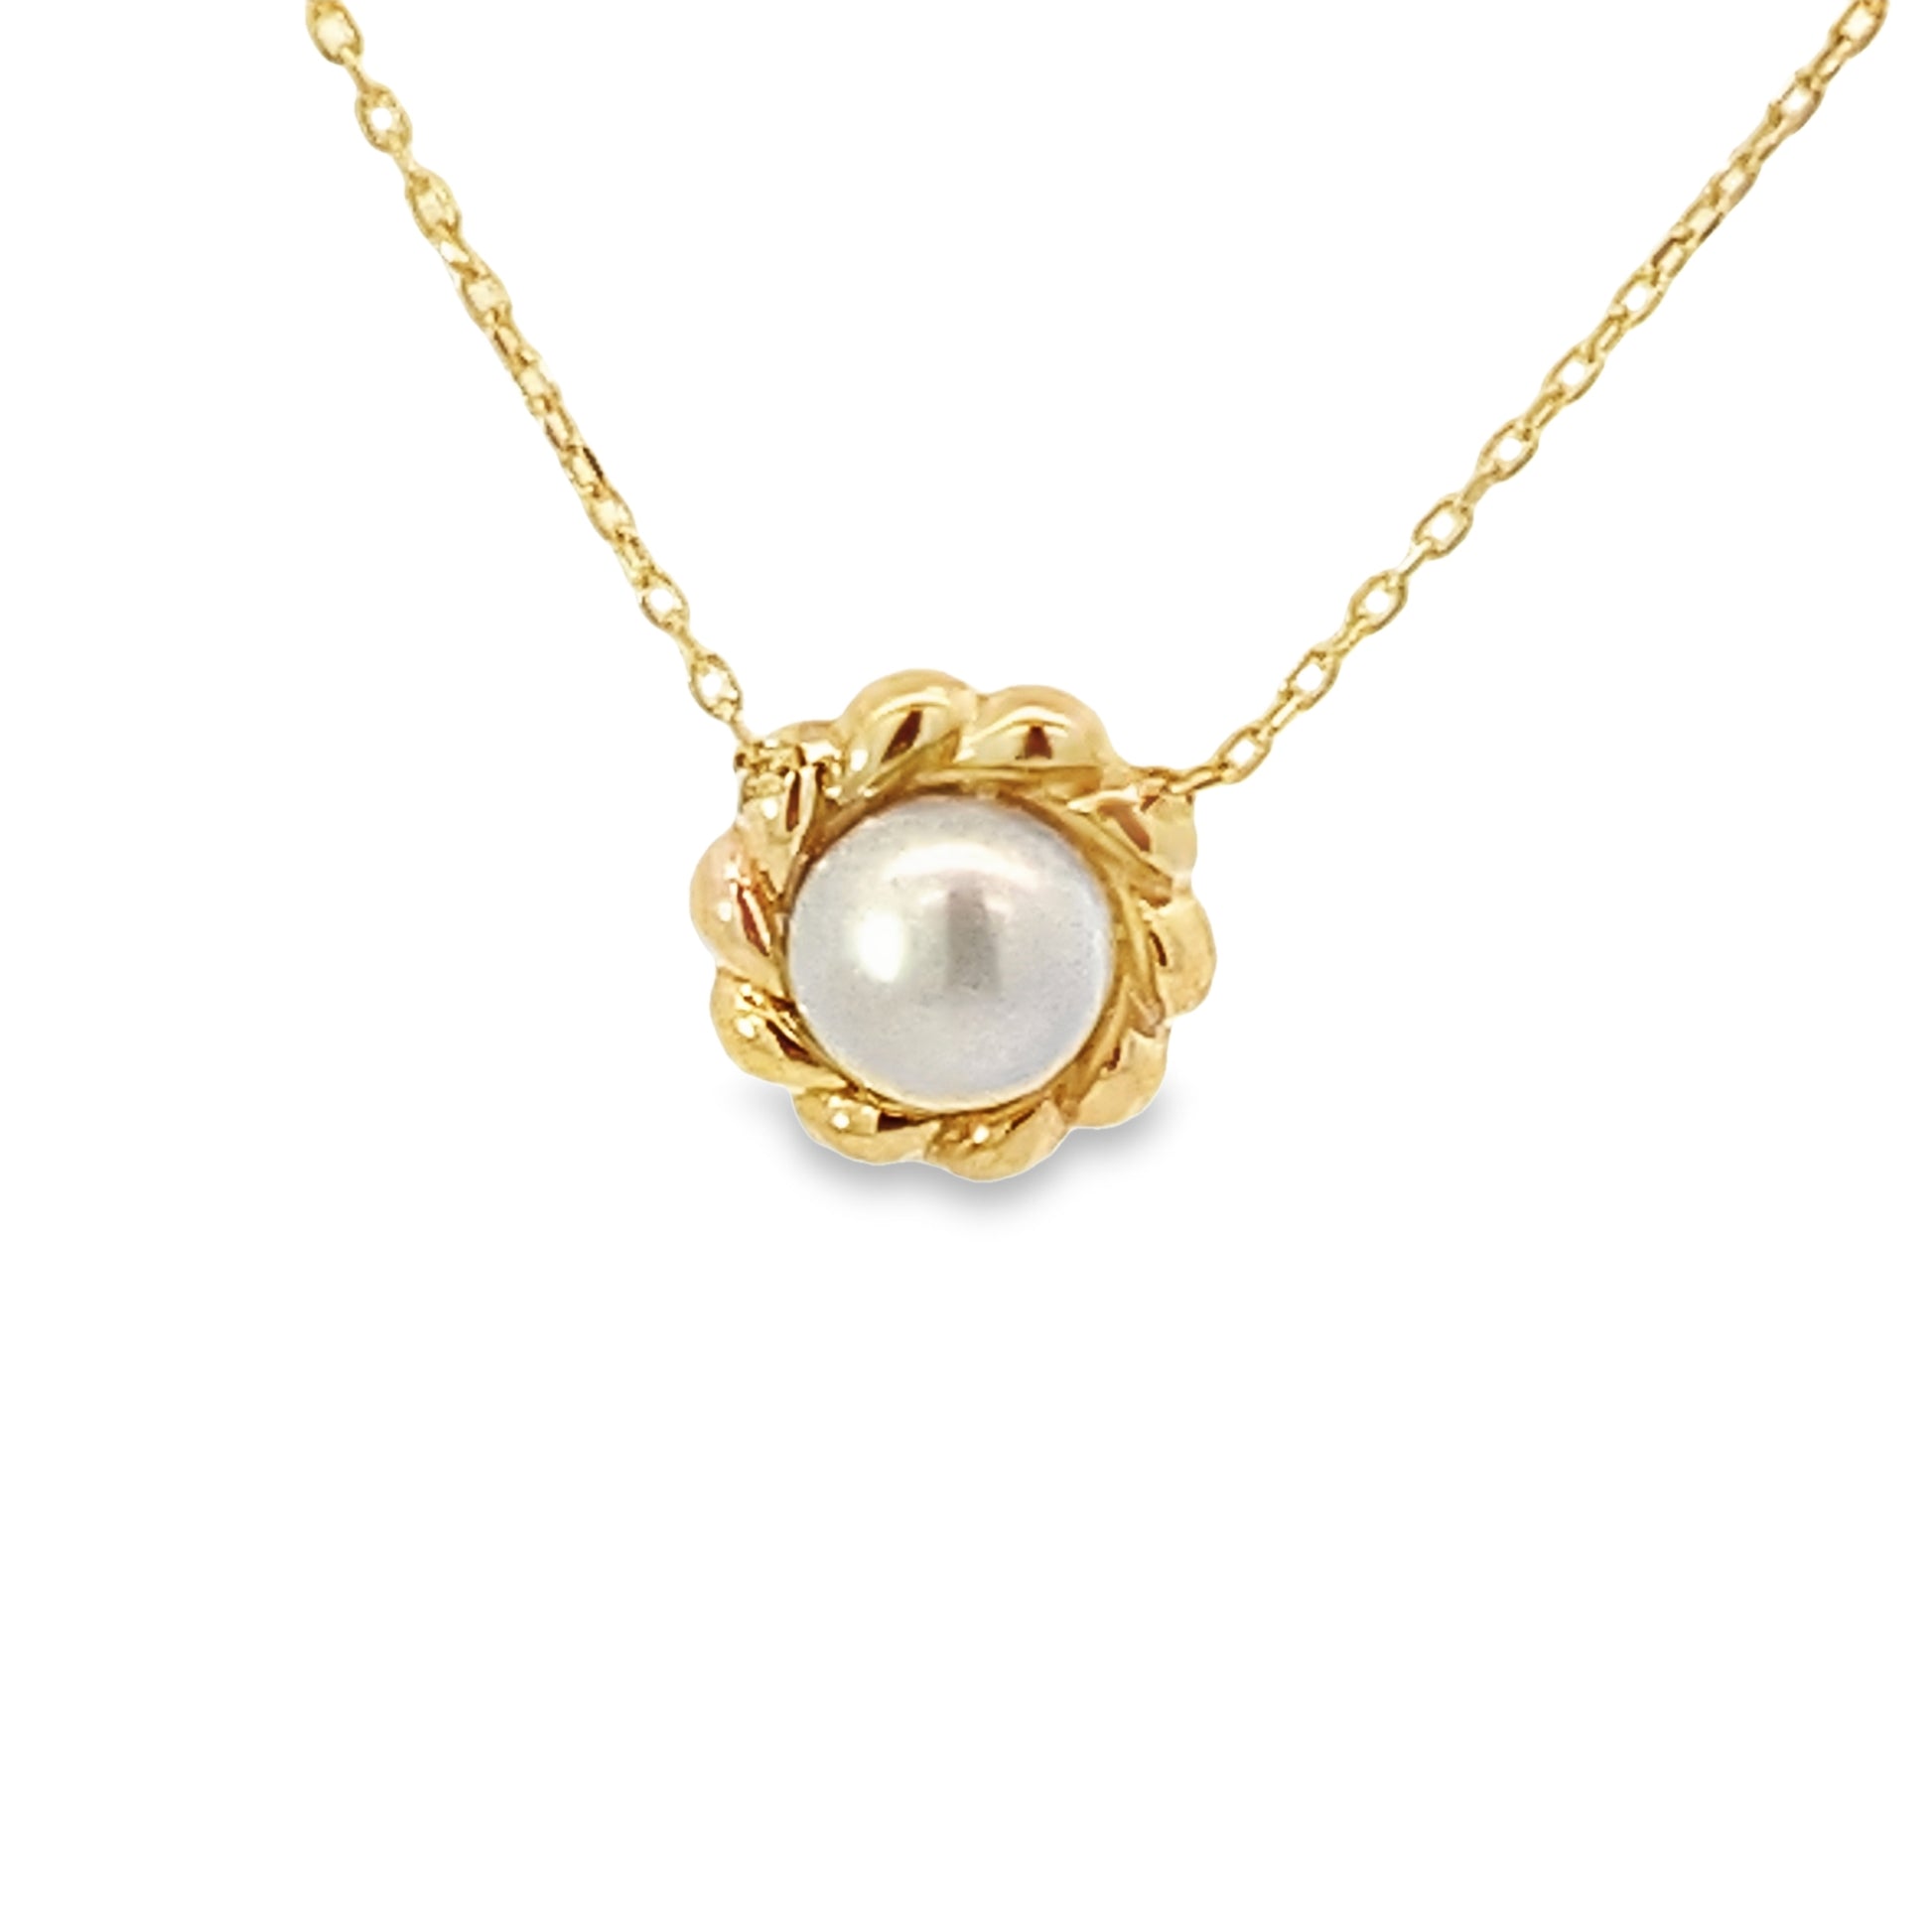 14K Yellow Gold Flower Pearl Pendant Necklace